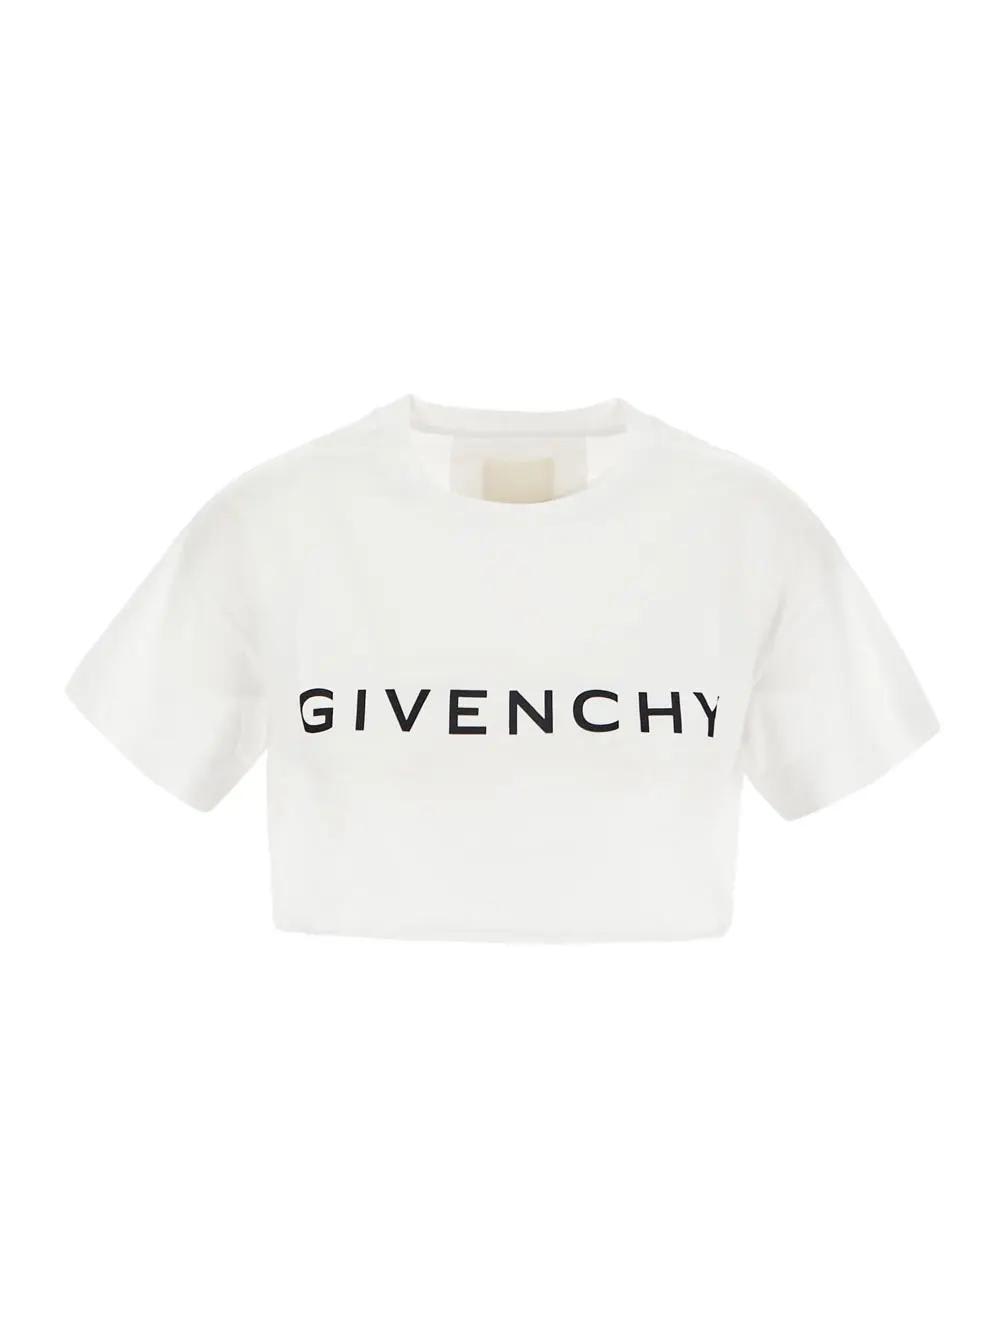 GIVENCHY CROPPED T-SHIRT